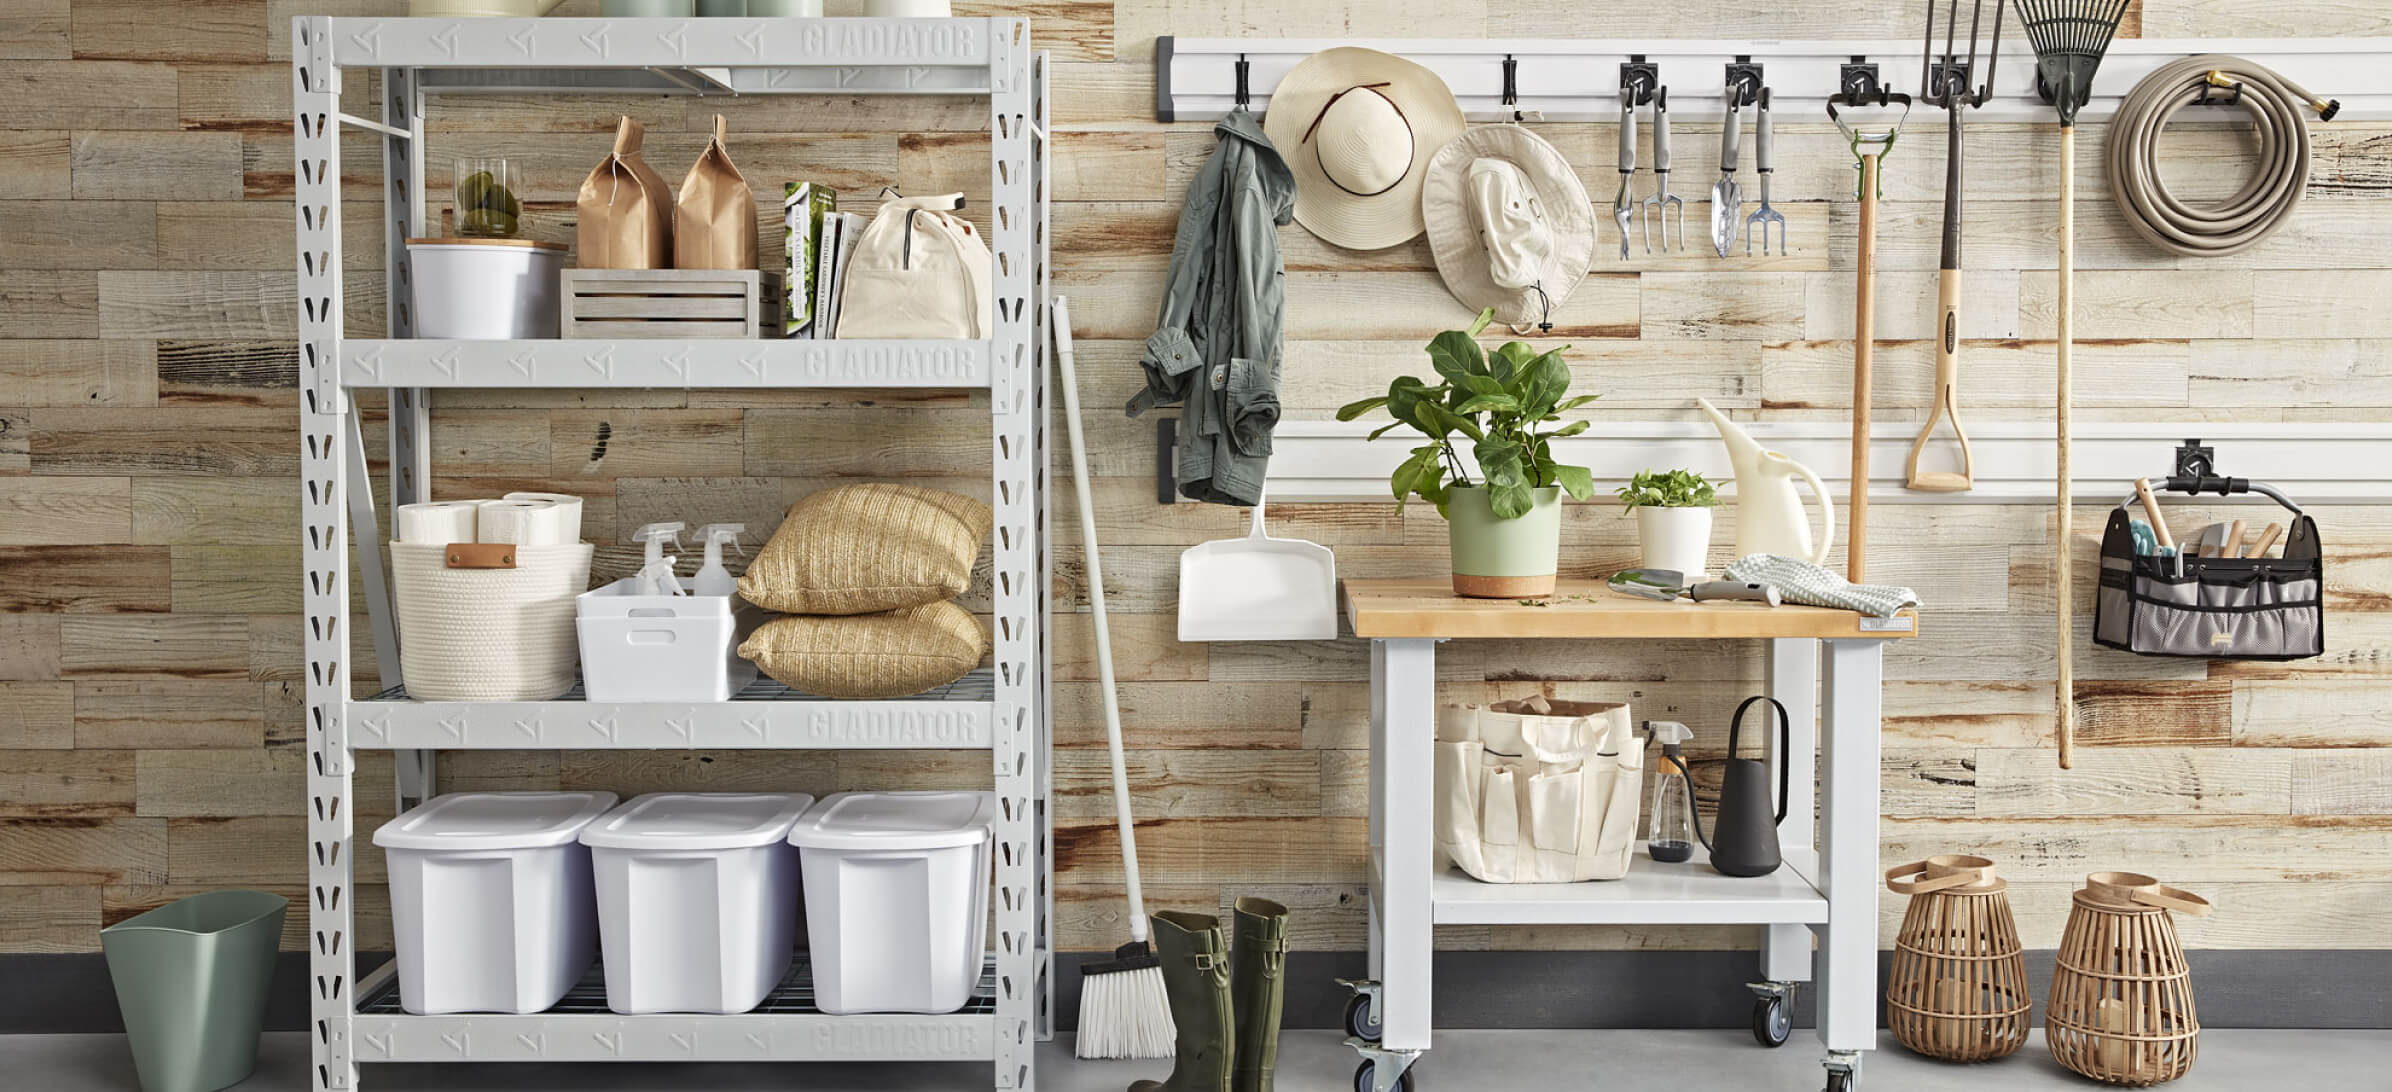 A Gladiator brand wall storage unit with various gardening and farming equipment.